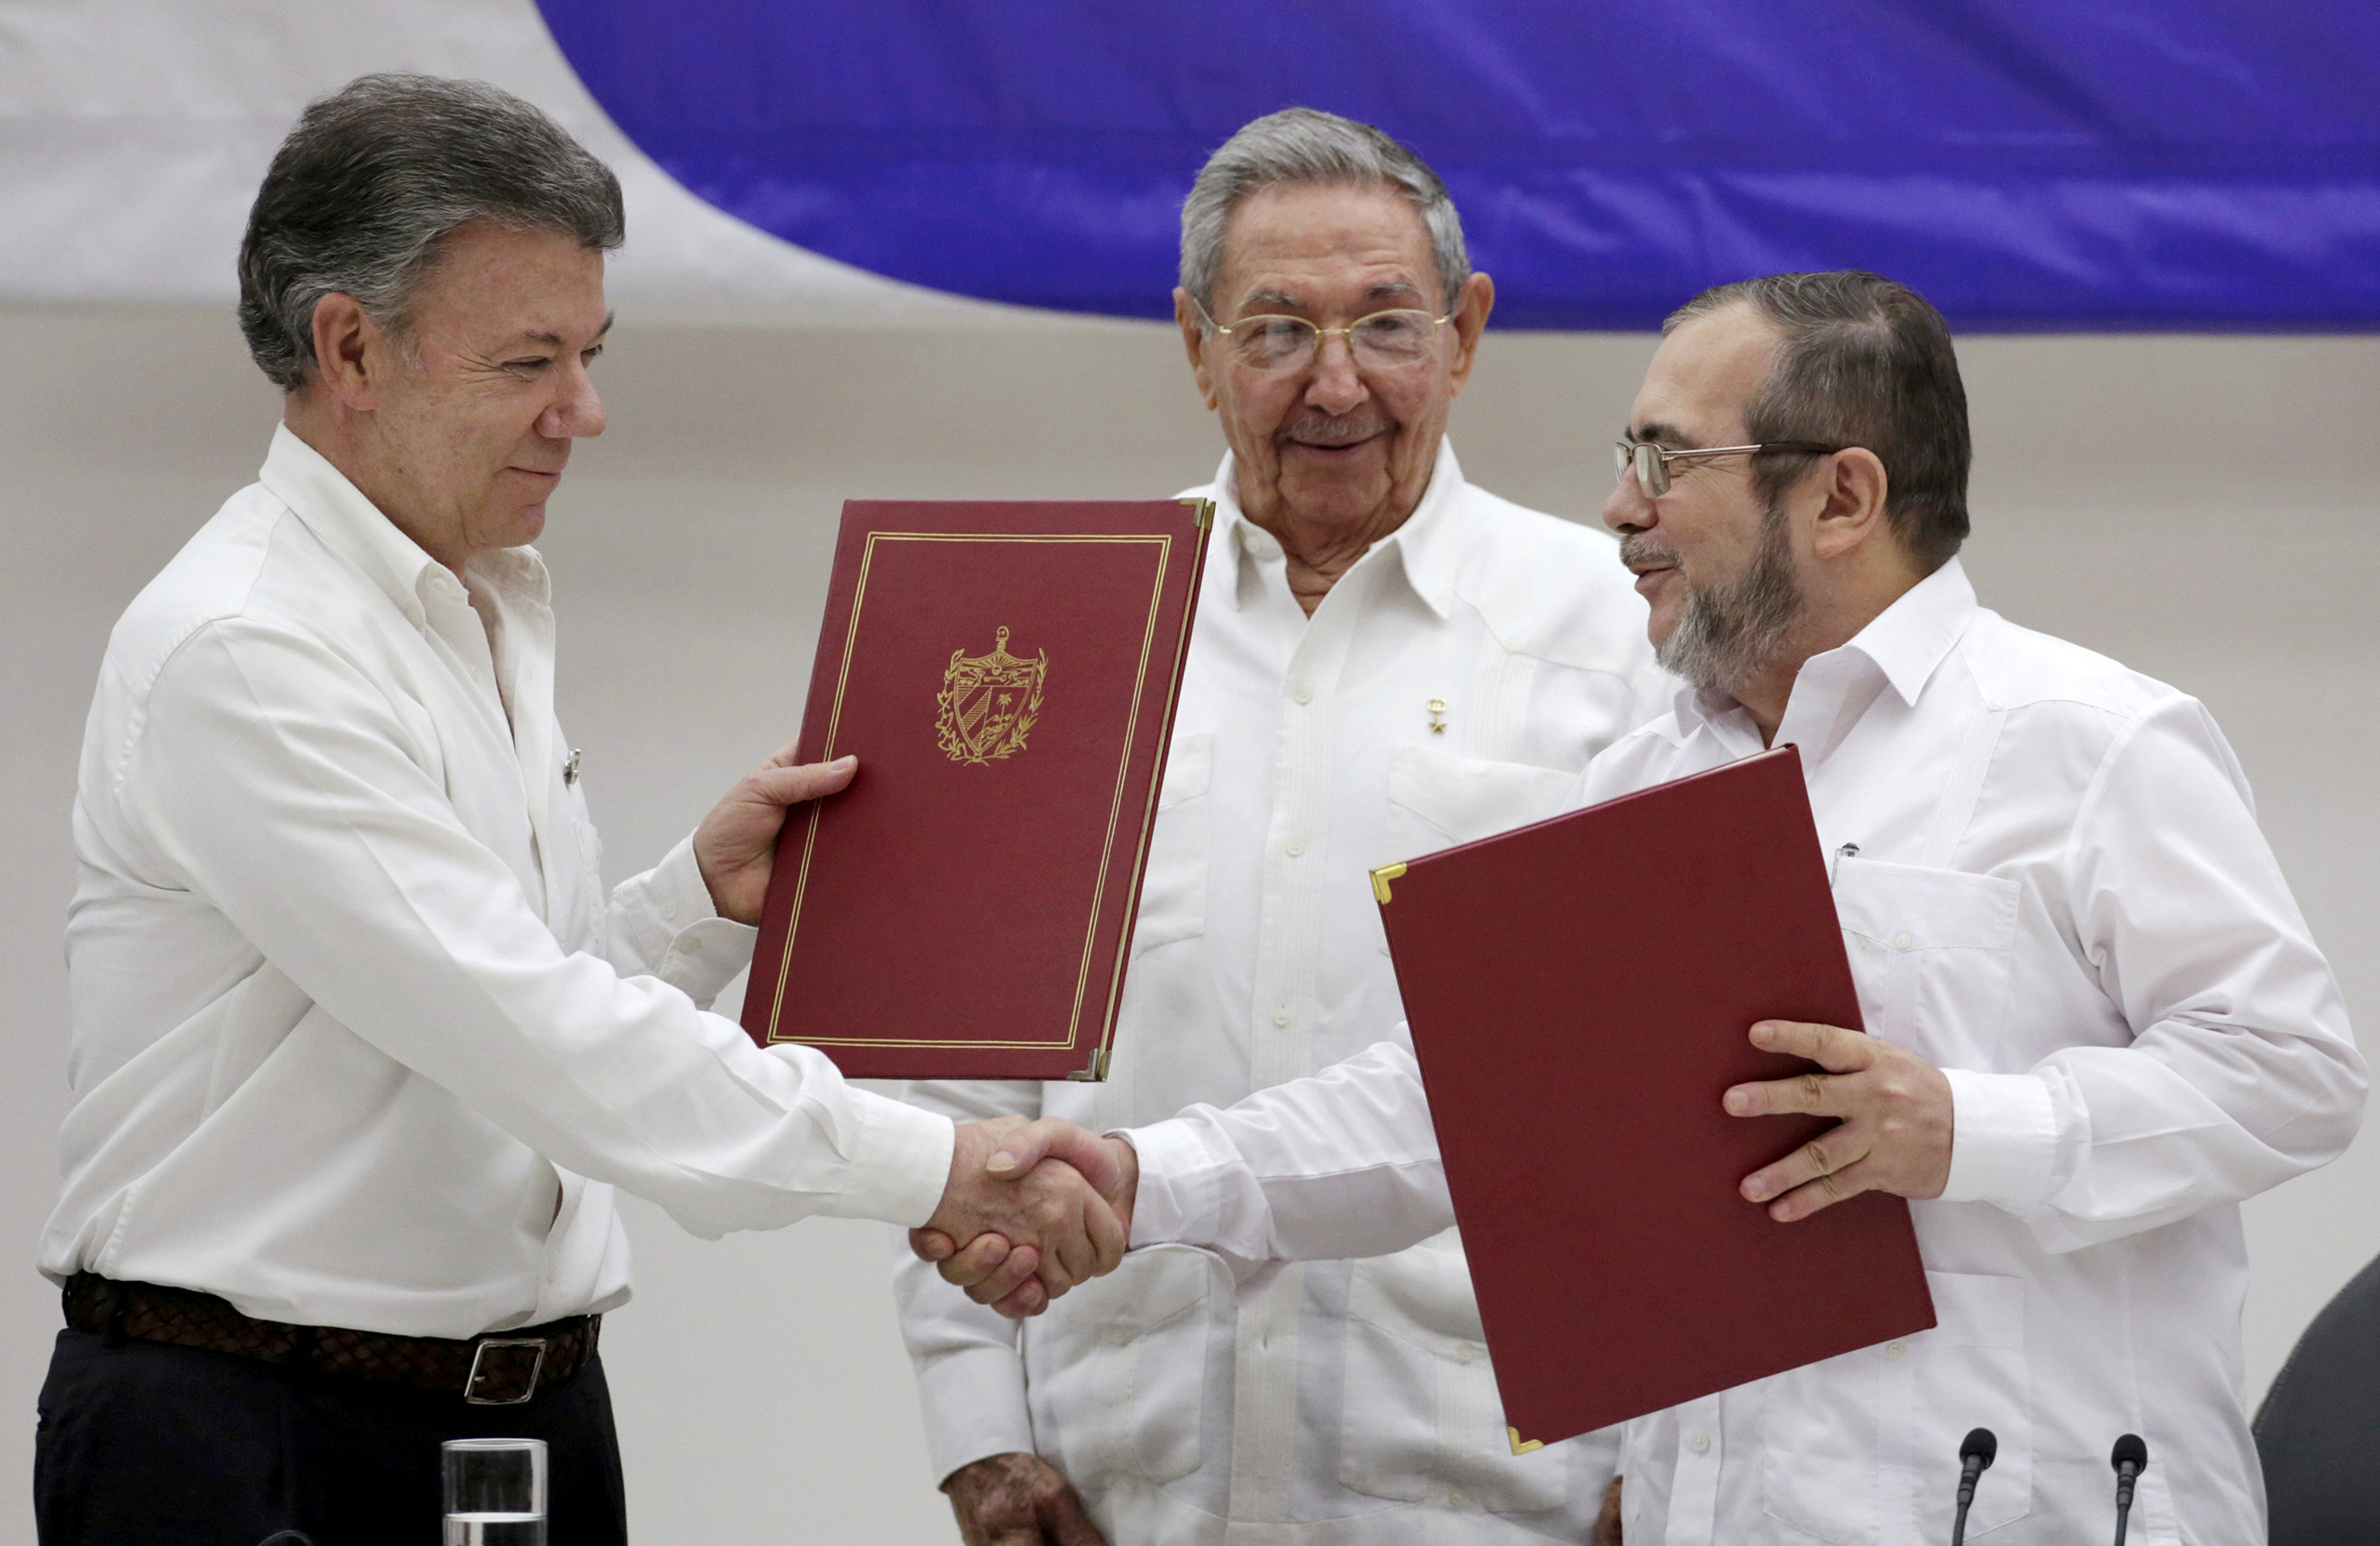 Cuba's President Raul Castro, Colombia's President Juan Manuel Santos and FARC rebel leader Rodrigo Londono react after the signing of a historic ceasefire deal between the Colombian government and FARC rebels in Havana